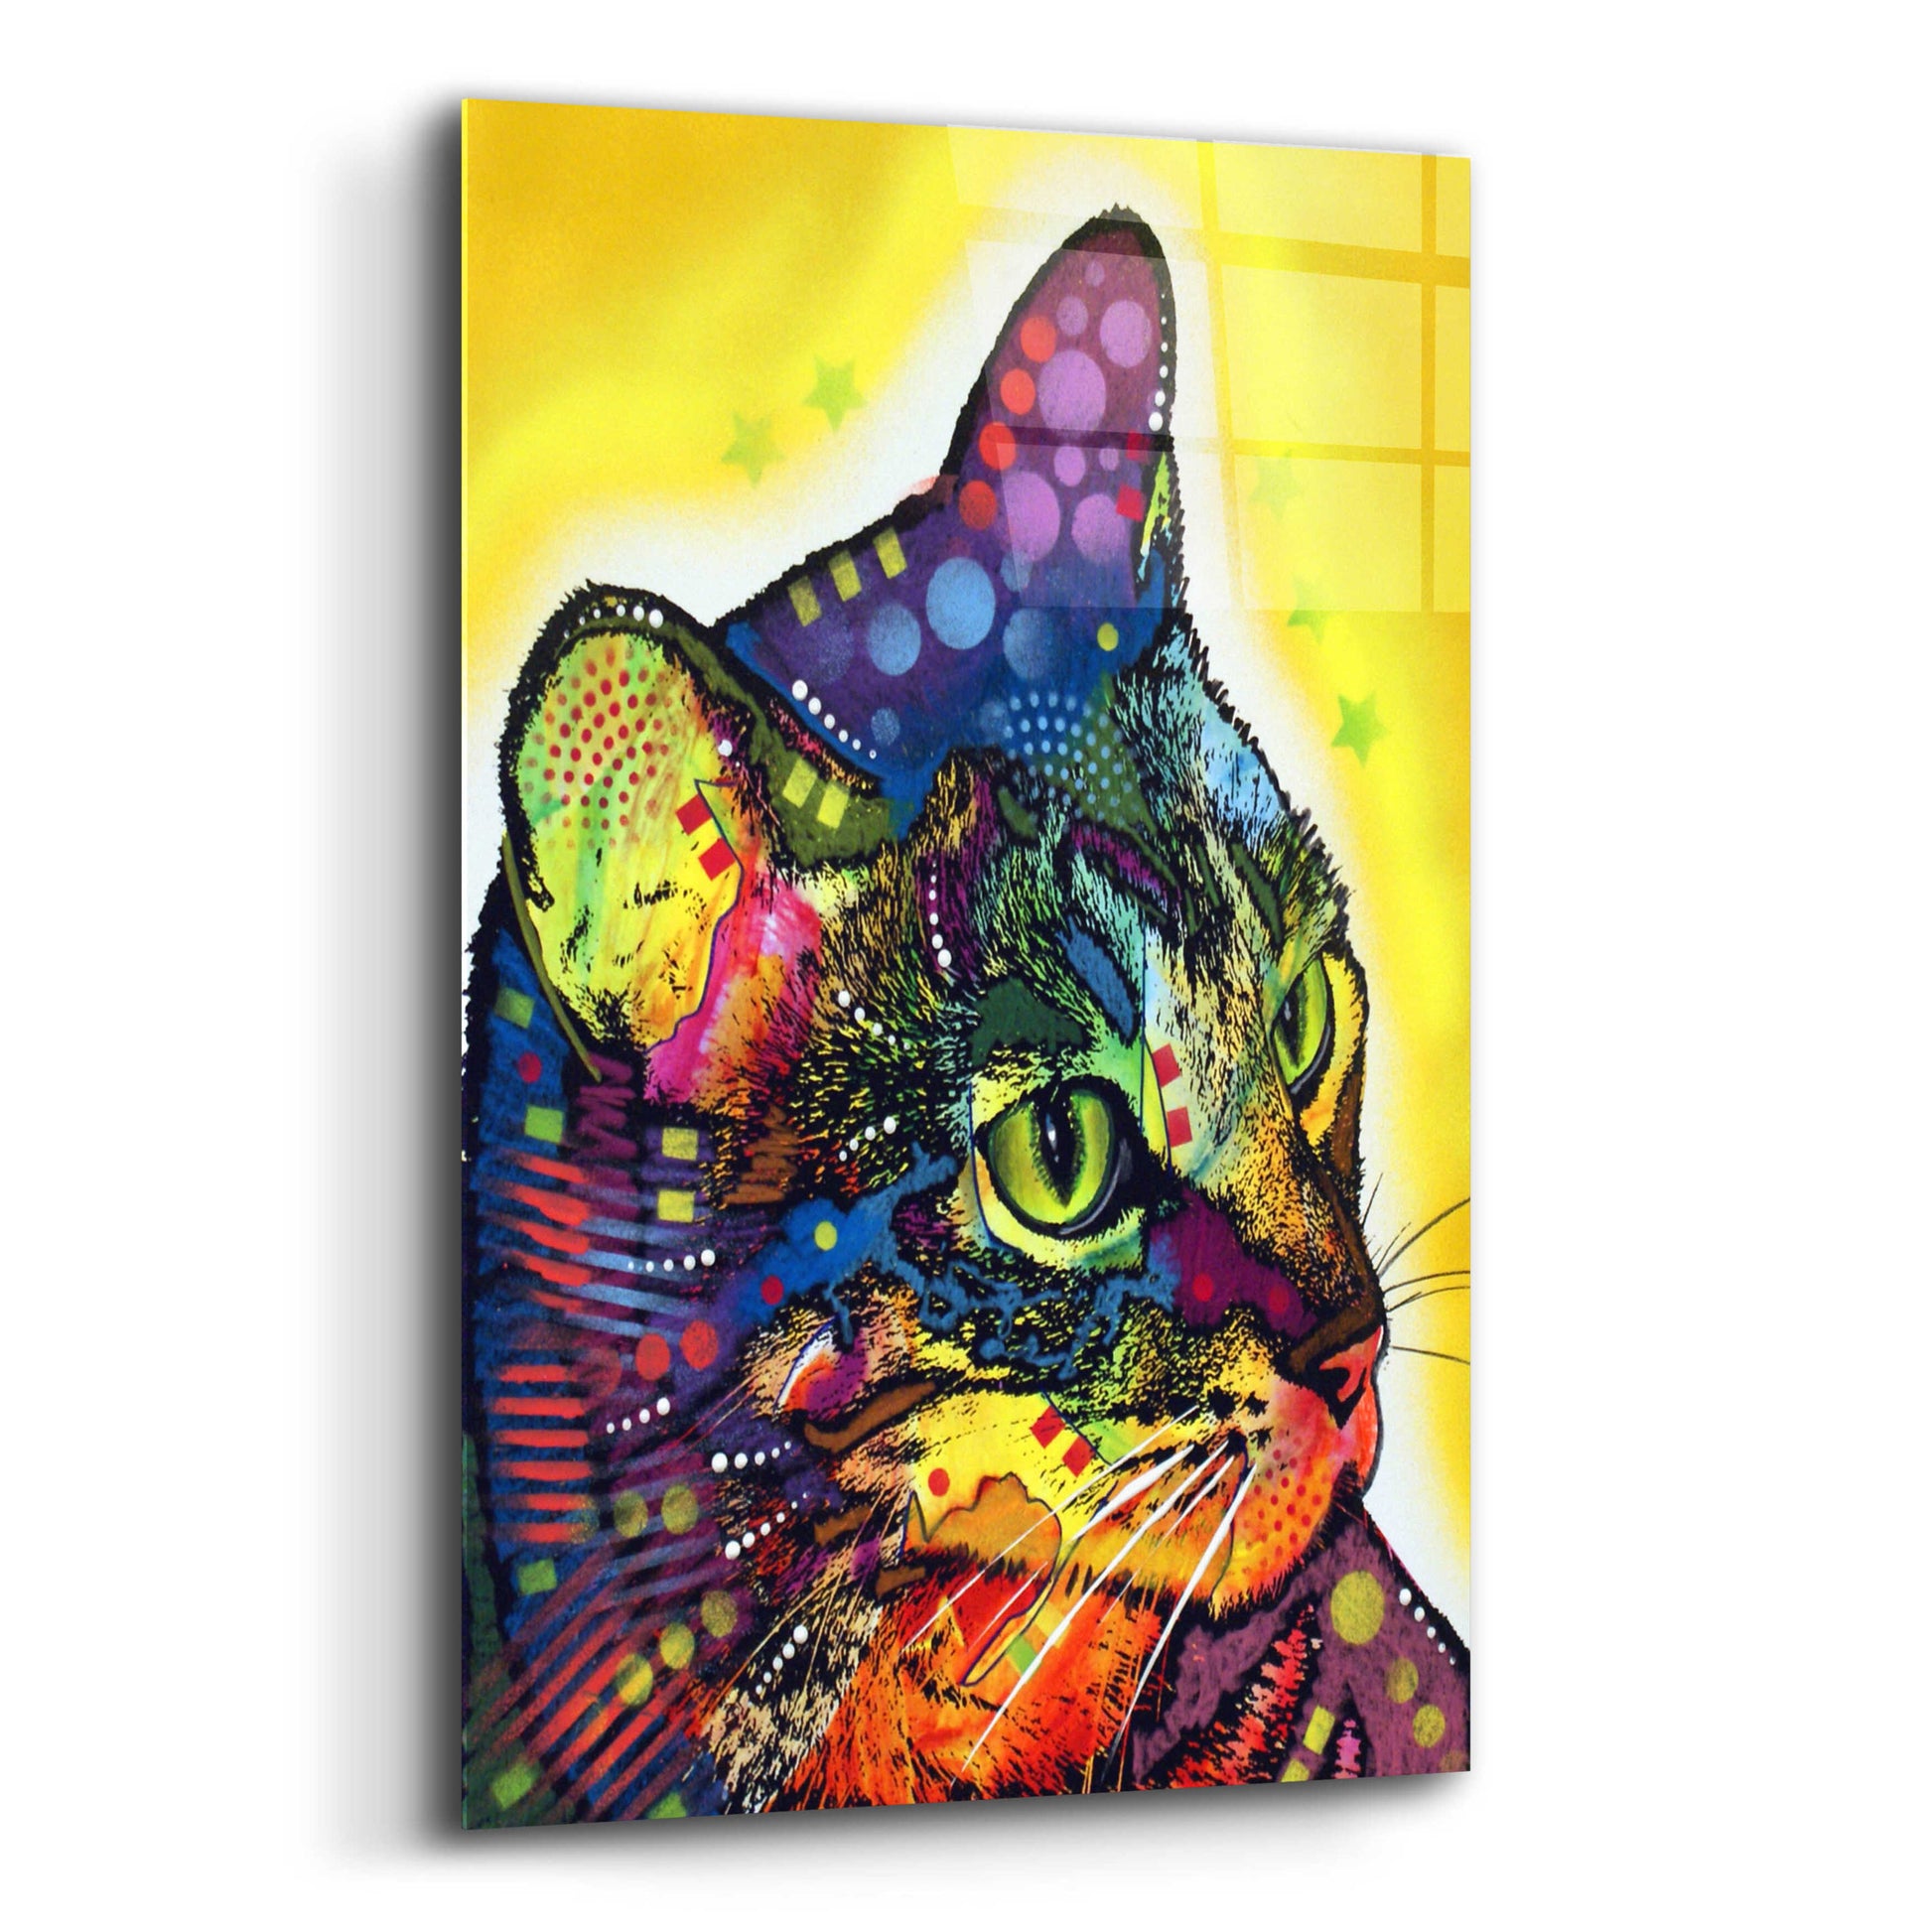 Epic Art 'Confident Cat' by Dean Russo, Acrylic Glass Wall Art,12x16